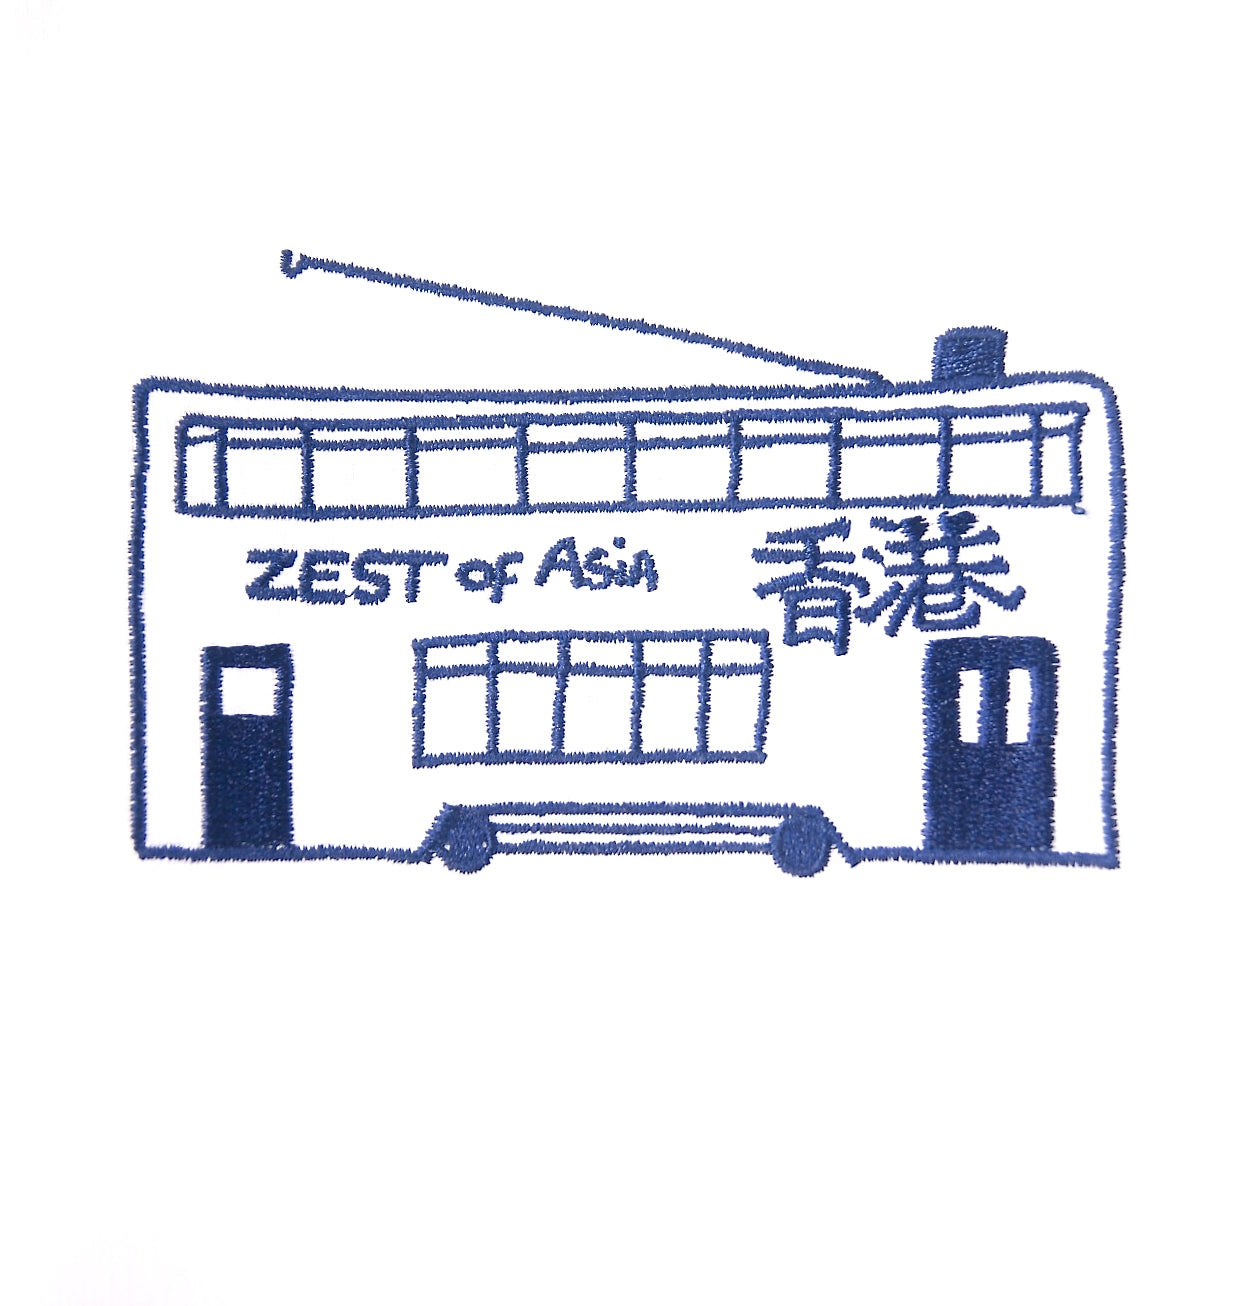 Embroidered Tram Tea Towel by Zest of Asia, Blue